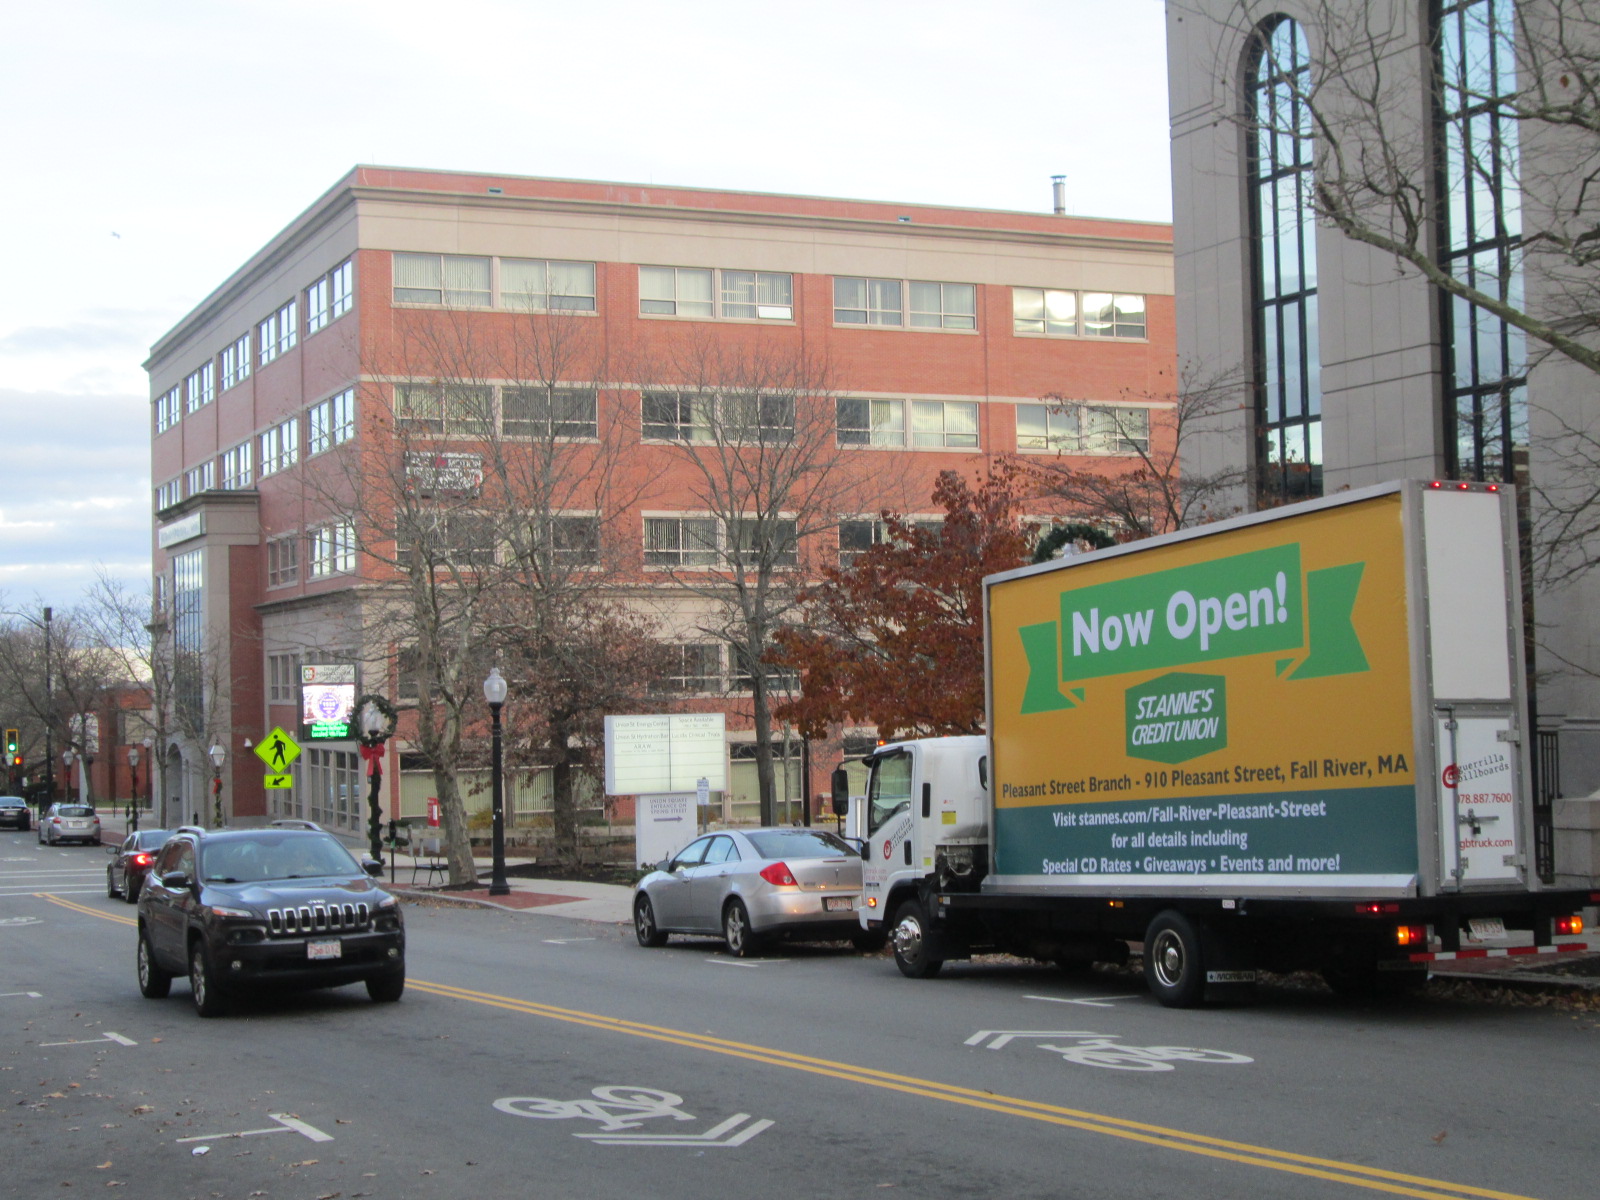 Mobile billboard truck stopped in downtown Fall River MA